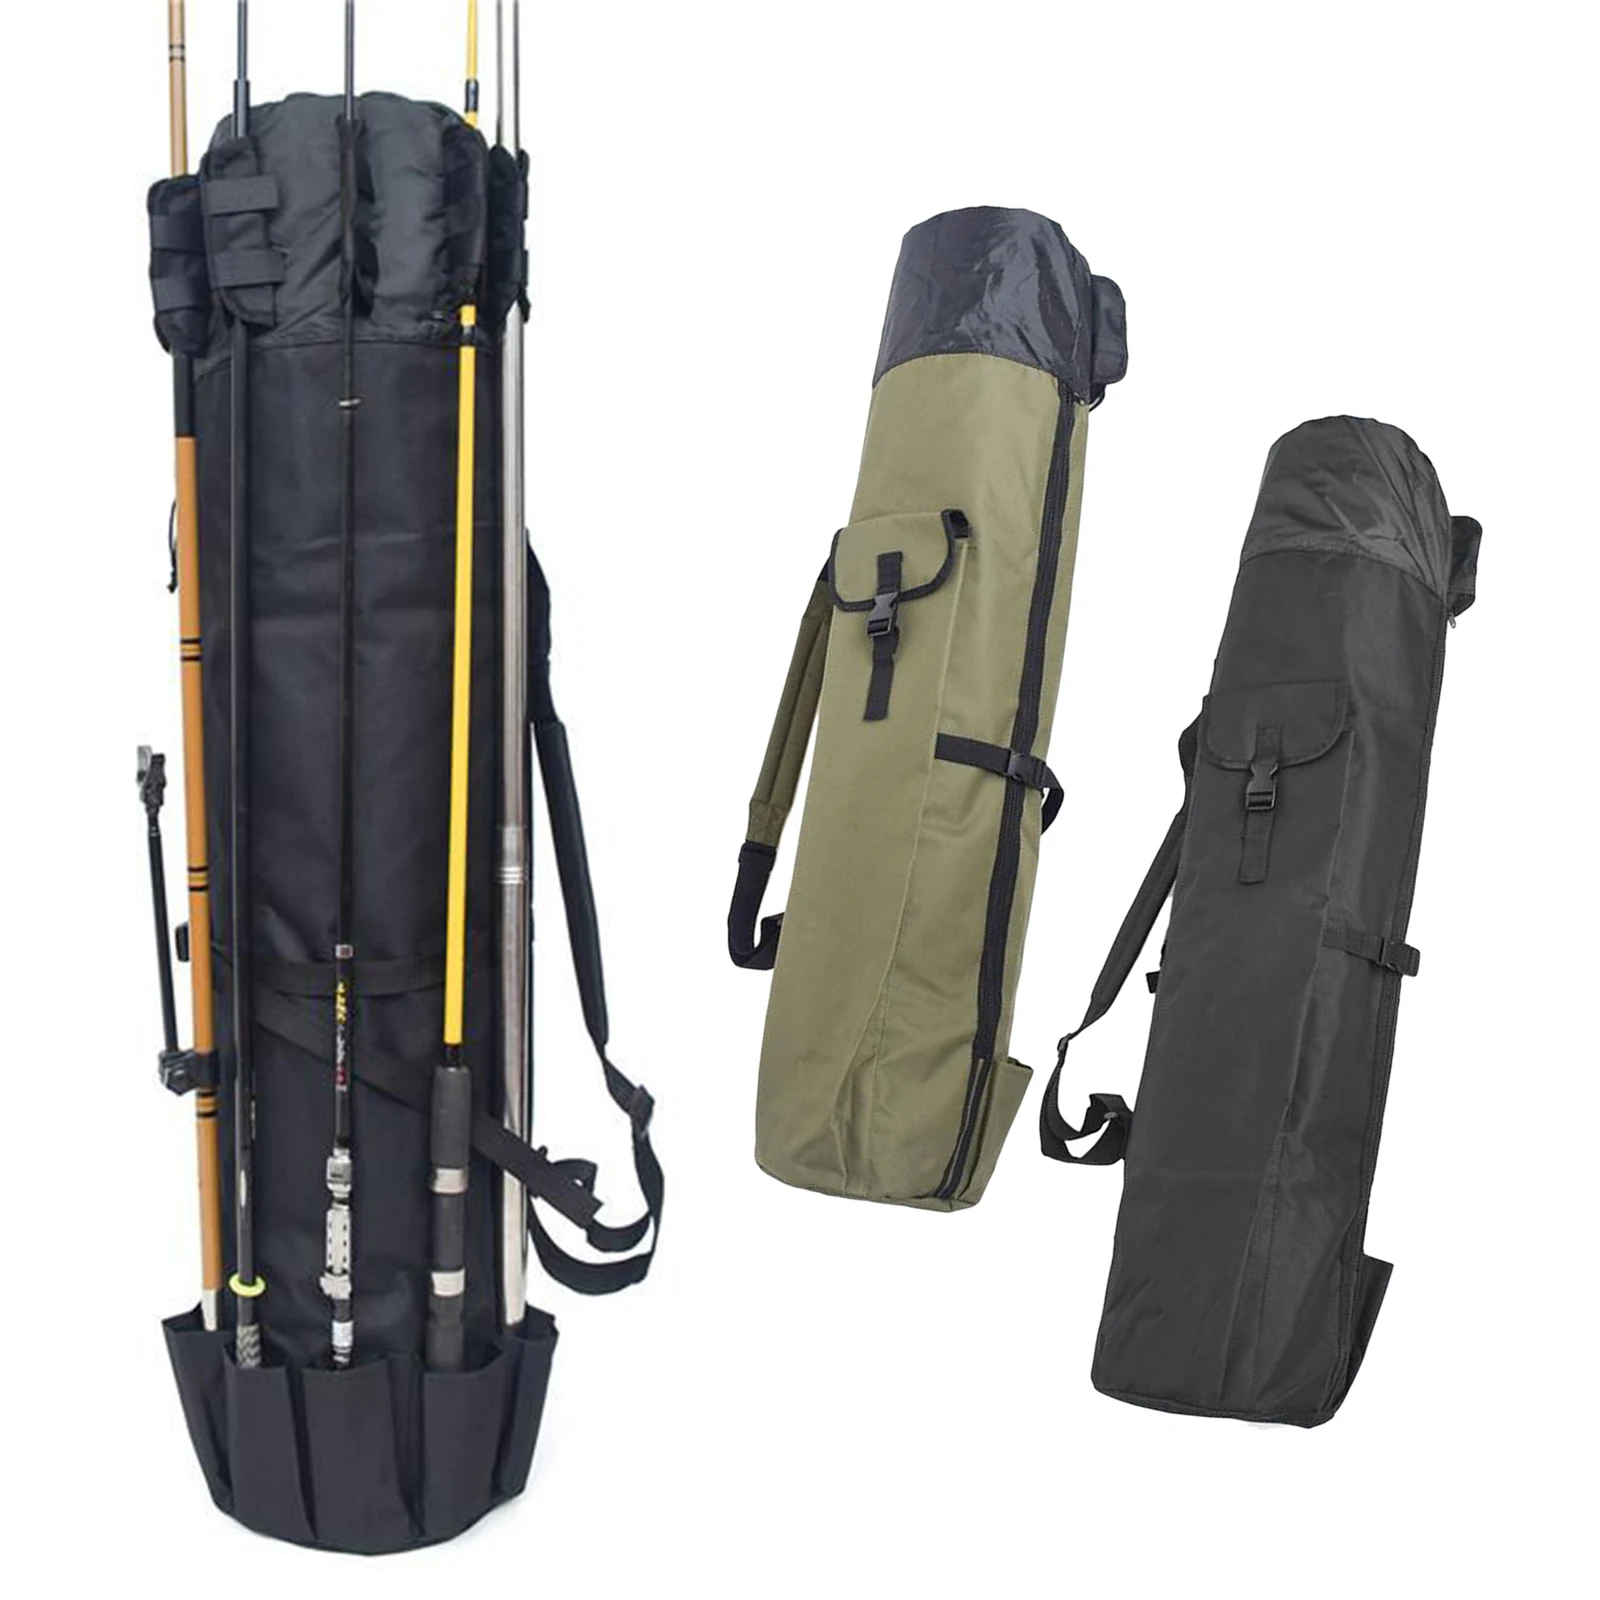 

Fishing Rod Bag Carrying Storage Case Organizer 5-Pole Holder Reel Carrier Fishing Gear Tackles Organiser with Adjustable Strap